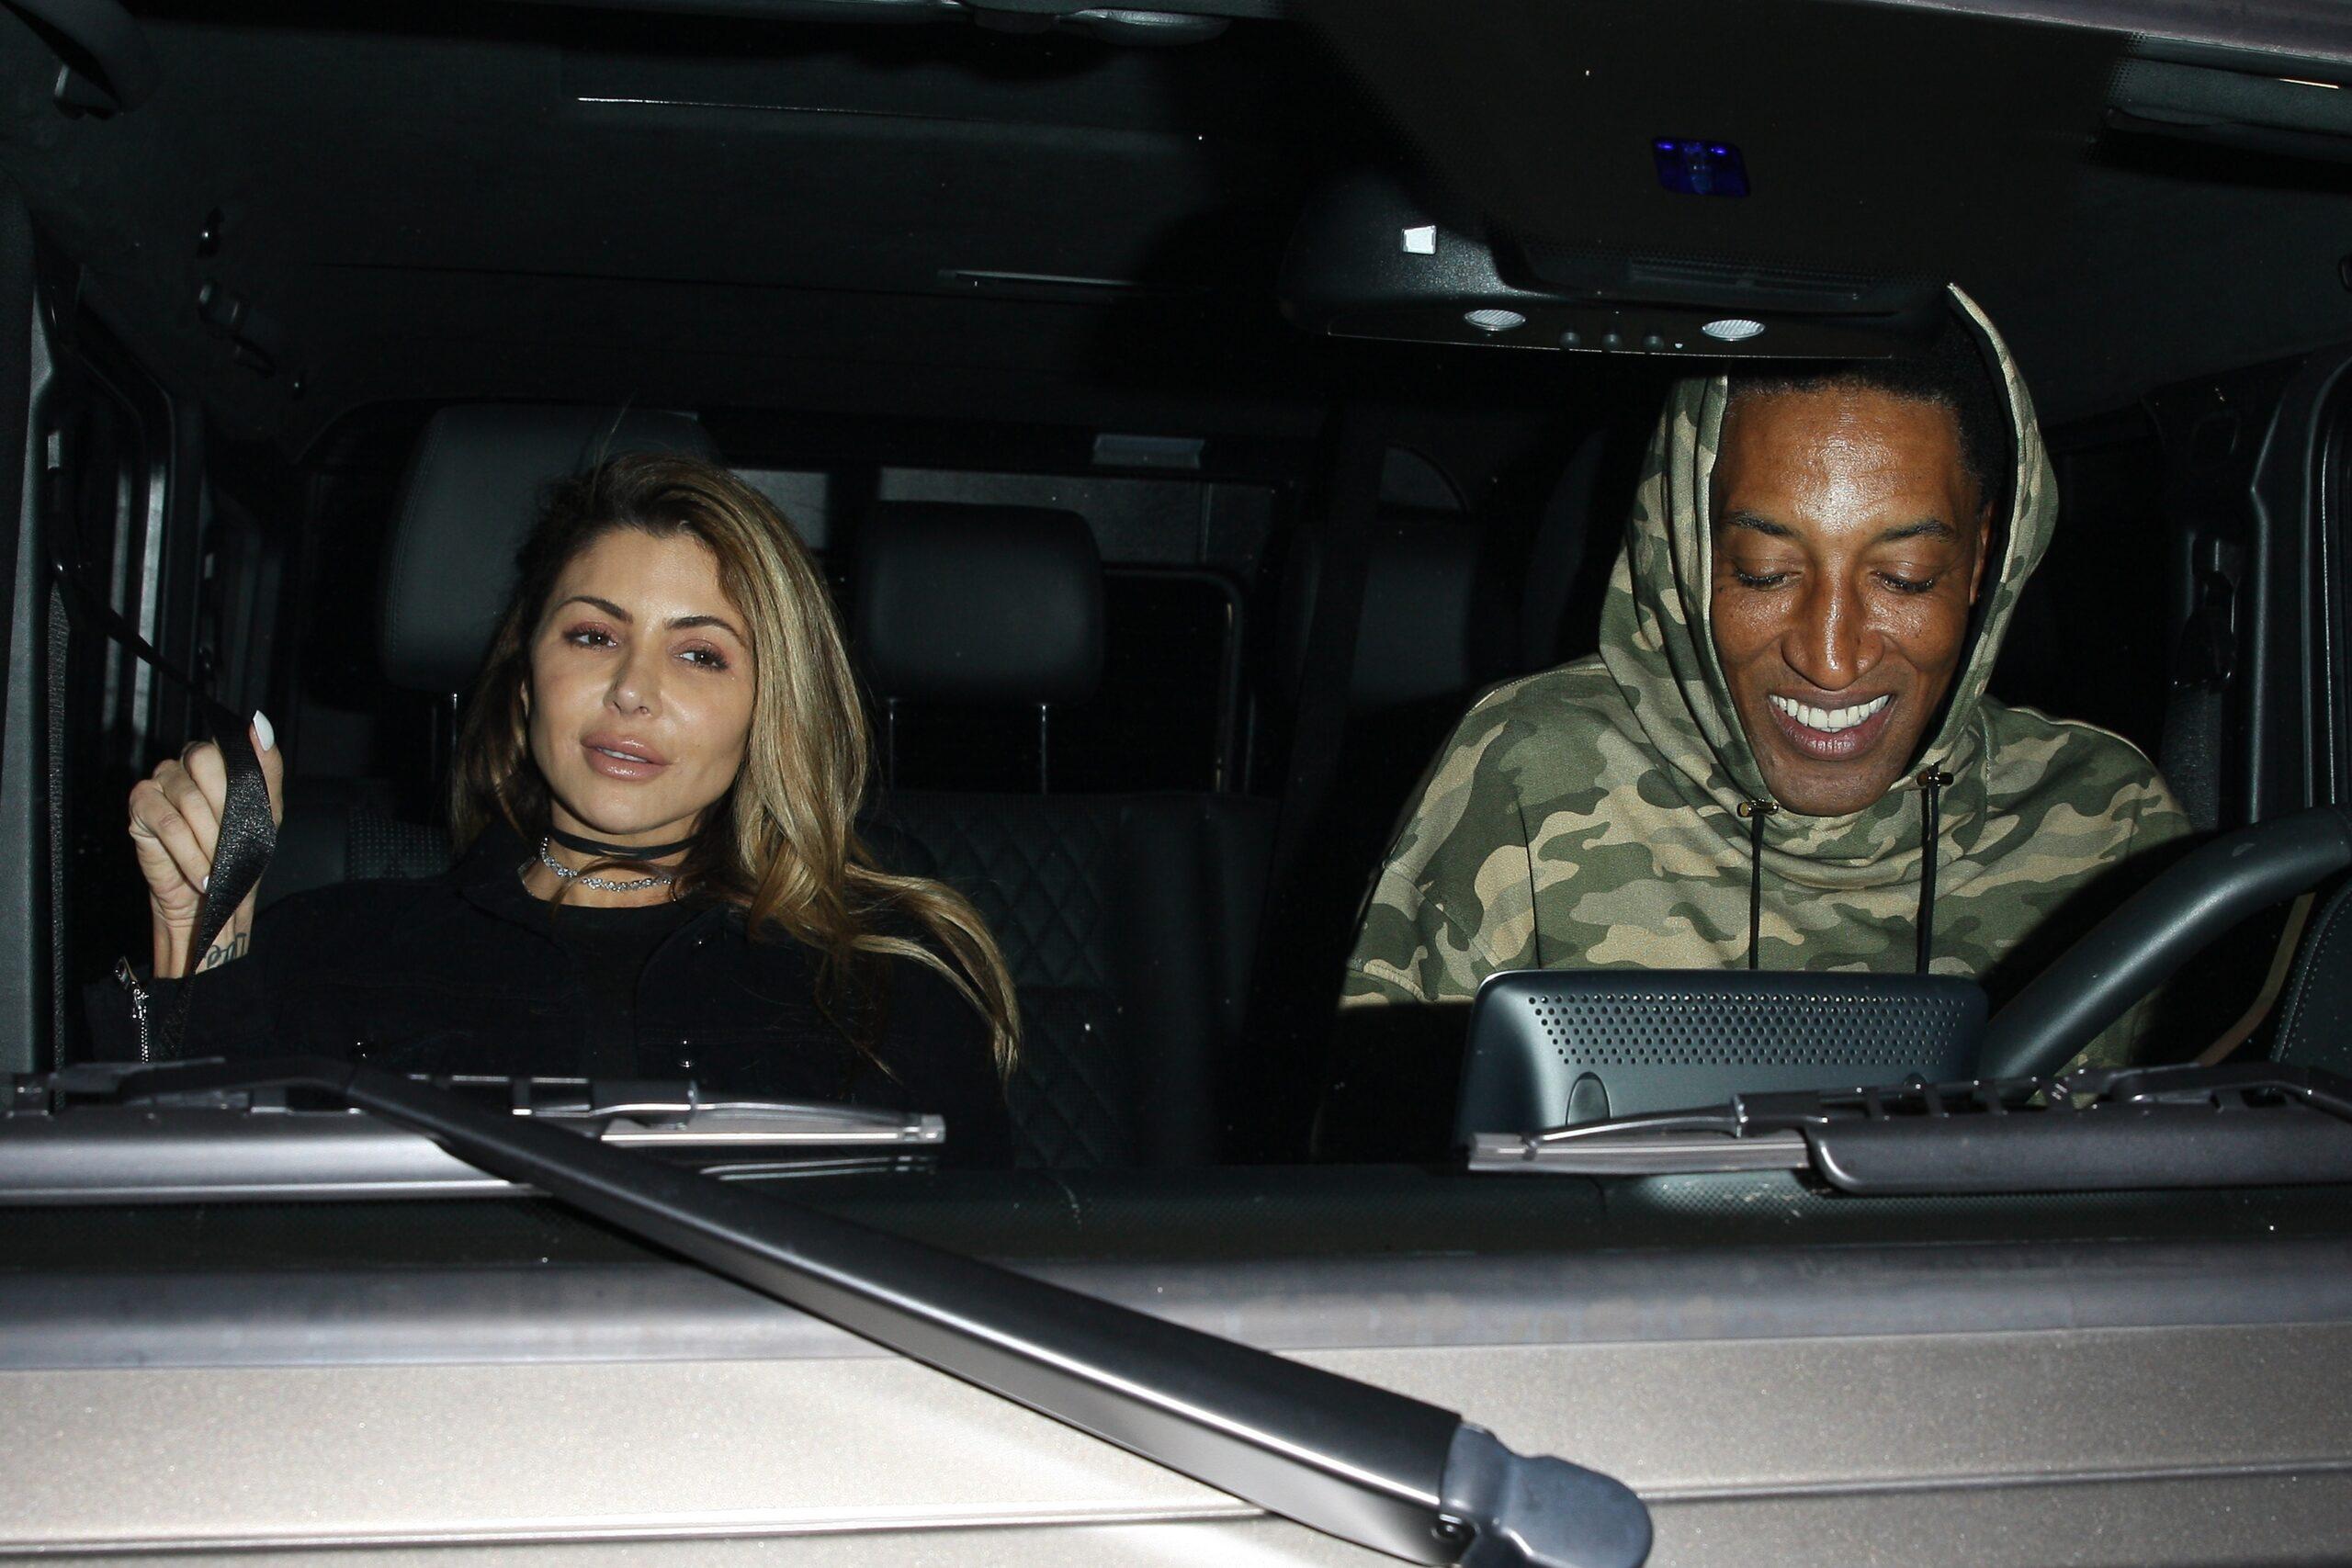 Scottie Pippen and wife Larsa Younan have a romantic dinner date at Italian Restaurant Madeo